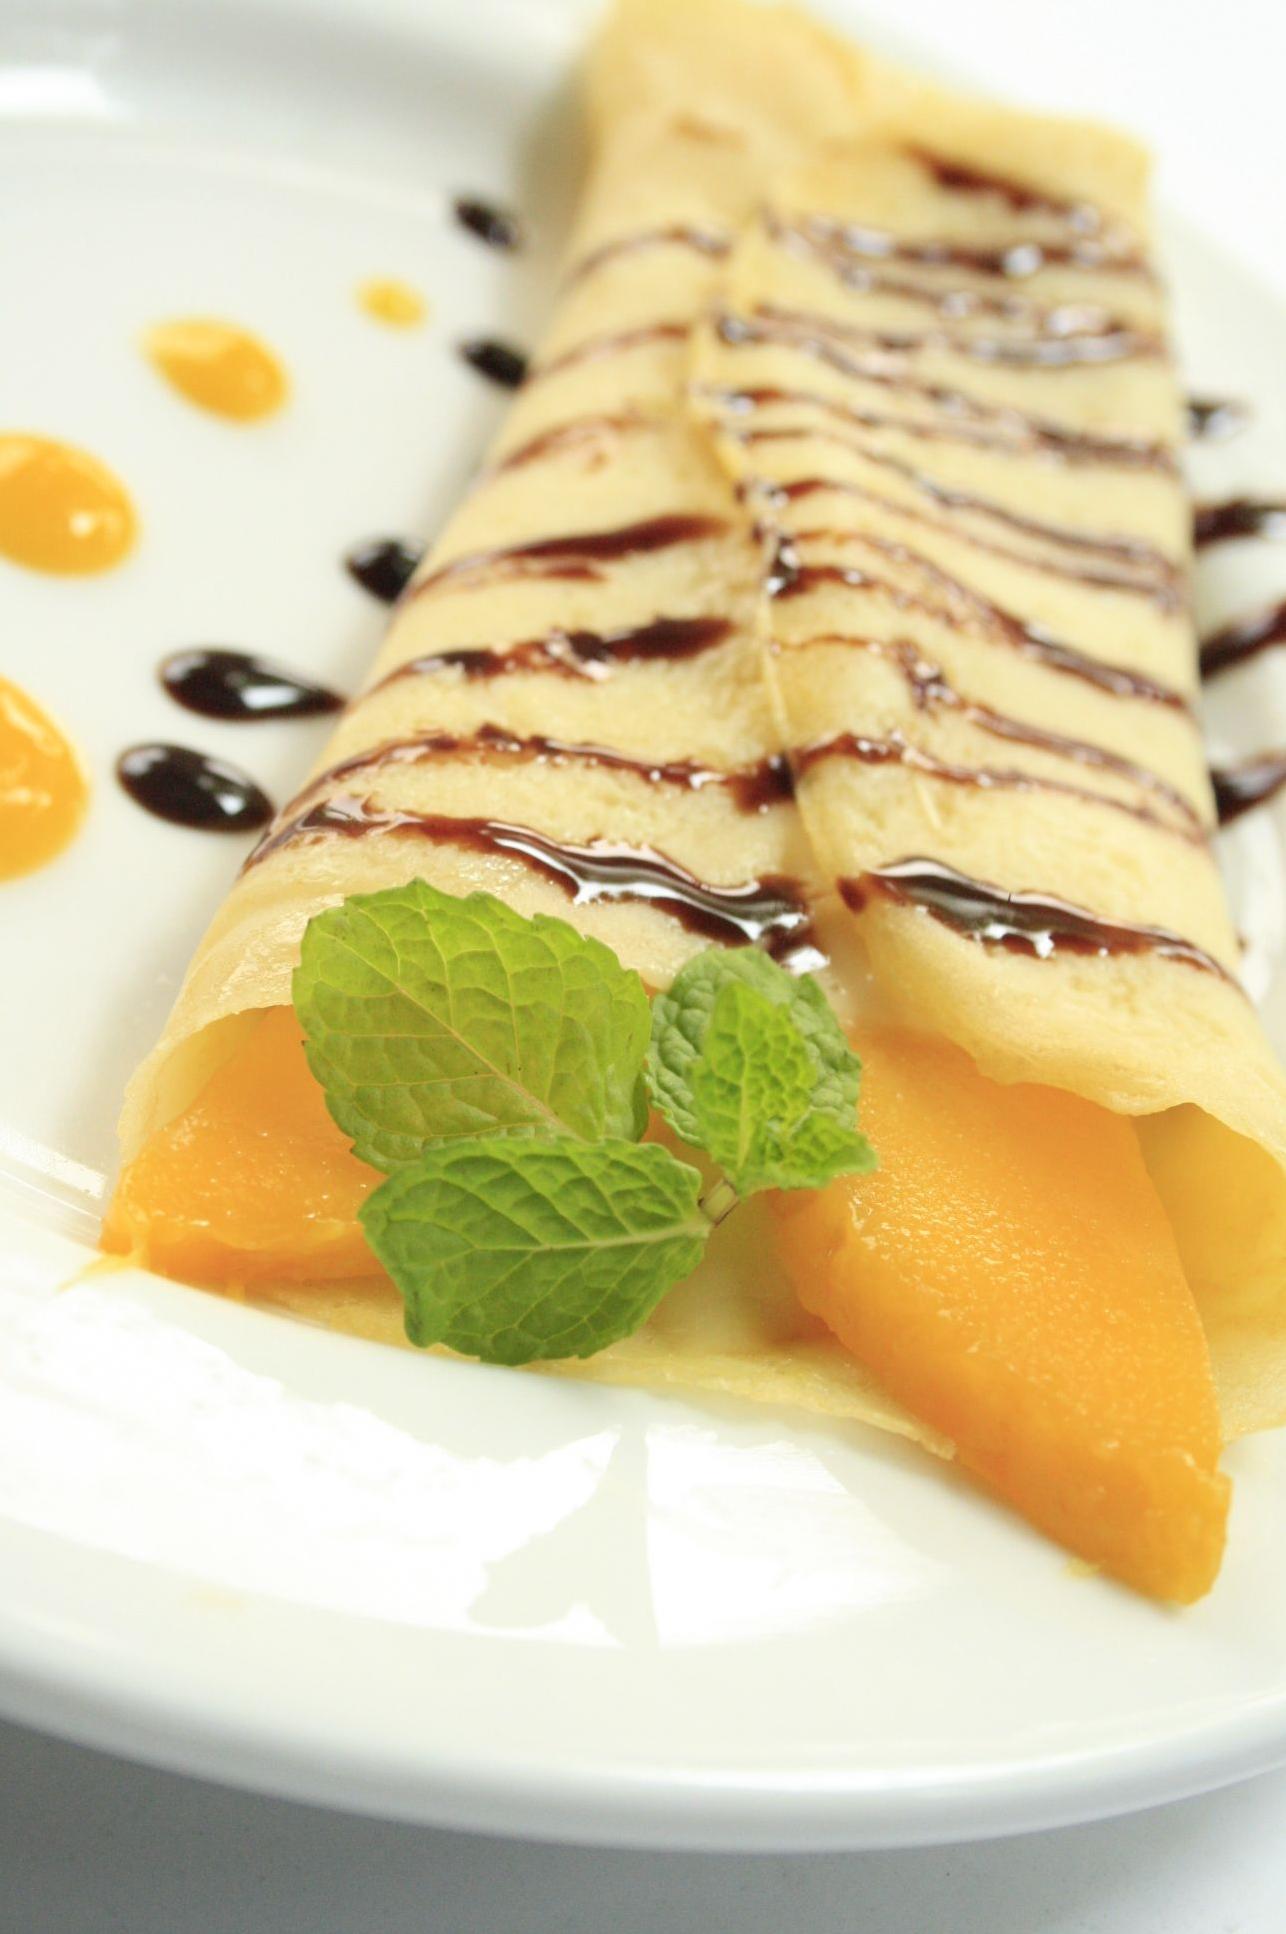  Savor the sweet and tangy flavors of our Mango Espresso Crepes